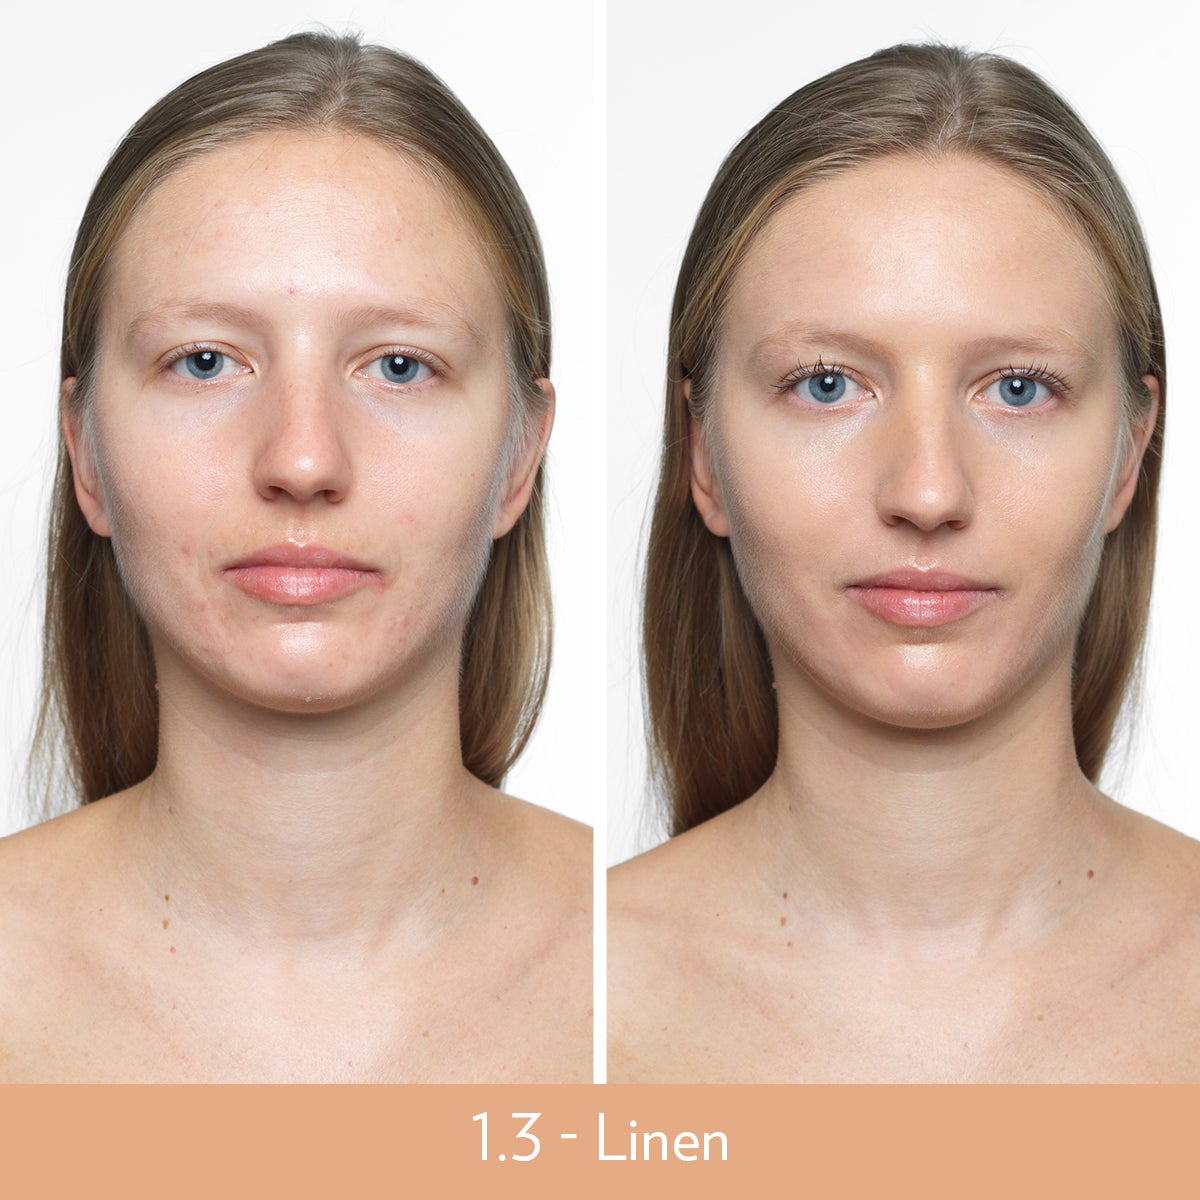 nu-skin-nu-colour-before-and-after-linen-image.jpg